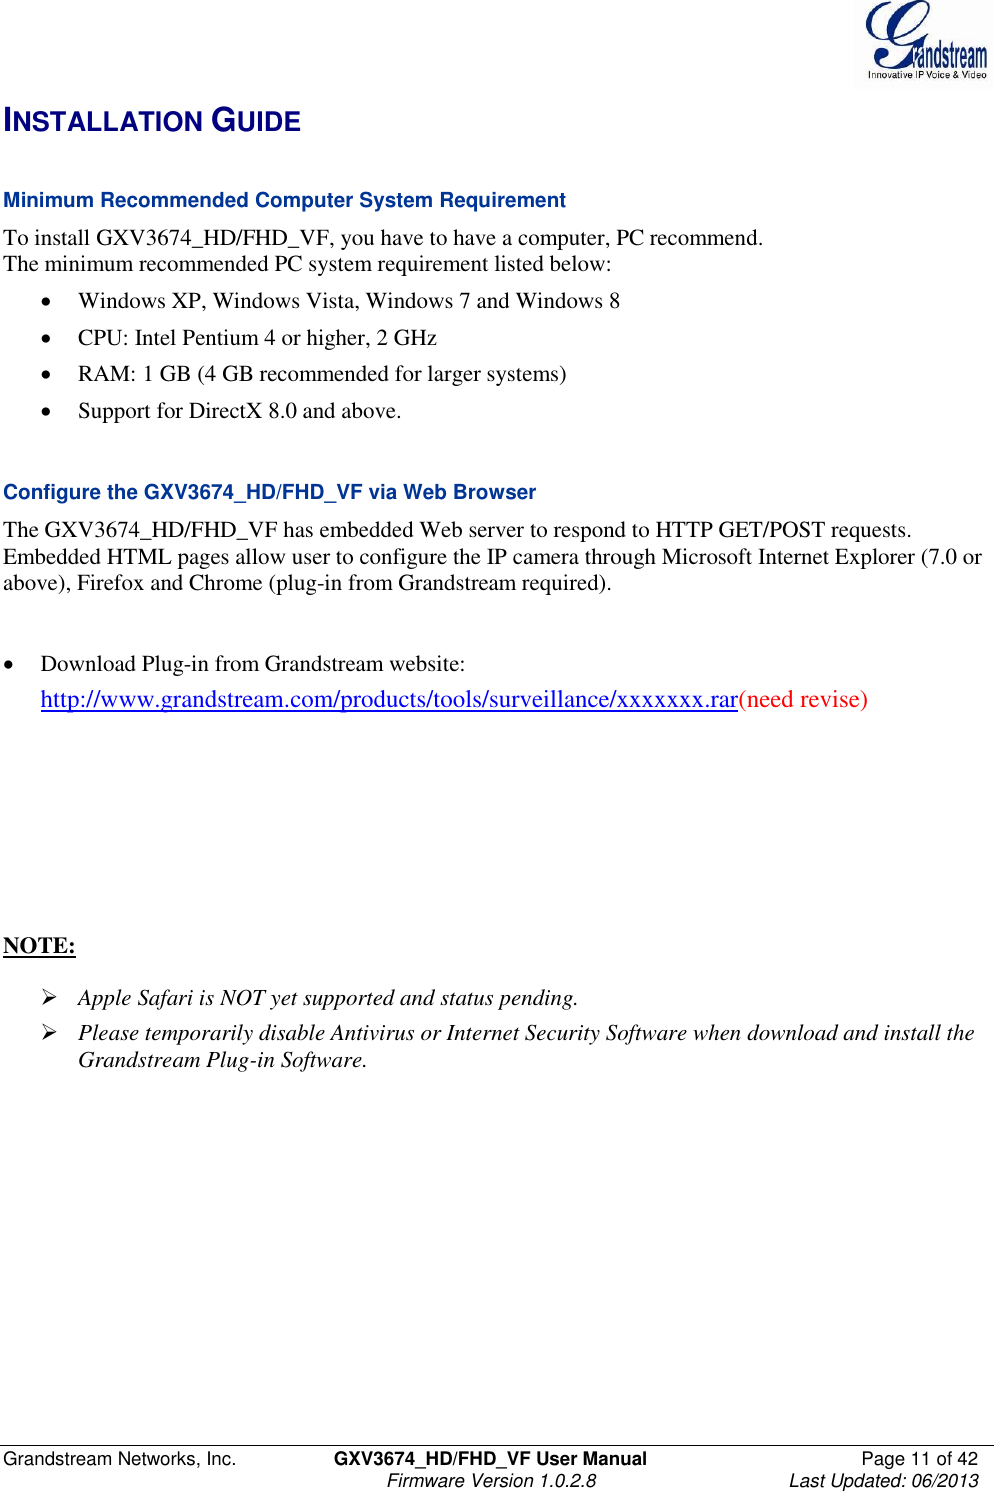  Grandstream Networks, Inc.  GXV3674_HD/FHD_VF User Manual  Page 11 of 42   Firmware Version 1.0.2.8  Last Updated: 06/2013  INSTALLATION GUIDE  Minimum Recommended Computer System Requirement To install GXV3674_HD/FHD_VF, you have to have a computer, PC recommend.  The minimum recommended PC system requirement listed below:   Windows XP, Windows Vista, Windows 7 and Windows 8  CPU: Intel Pentium 4 or higher, 2 GHz  RAM: 1 GB (4 GB recommended for larger systems)  Support for DirectX 8.0 and above.    Configure the GXV3674_HD/FHD_VF via Web Browser The GXV3674_HD/FHD_VF has embedded Web server to respond to HTTP GET/POST requests. Embedded HTML pages allow user to configure the IP camera through Microsoft Internet Explorer (7.0 or above), Firefox and Chrome (plug-in from Grandstream required).     Download Plug-in from Grandstream website:  http://www.grandstream.com/products/tools/surveillance/xxxxxxx.rar(need revise)        NOTE:    Apple Safari is NOT yet supported and status pending.   Please temporarily disable Antivirus or Internet Security Software when download and install the Grandstream Plug-in Software.  